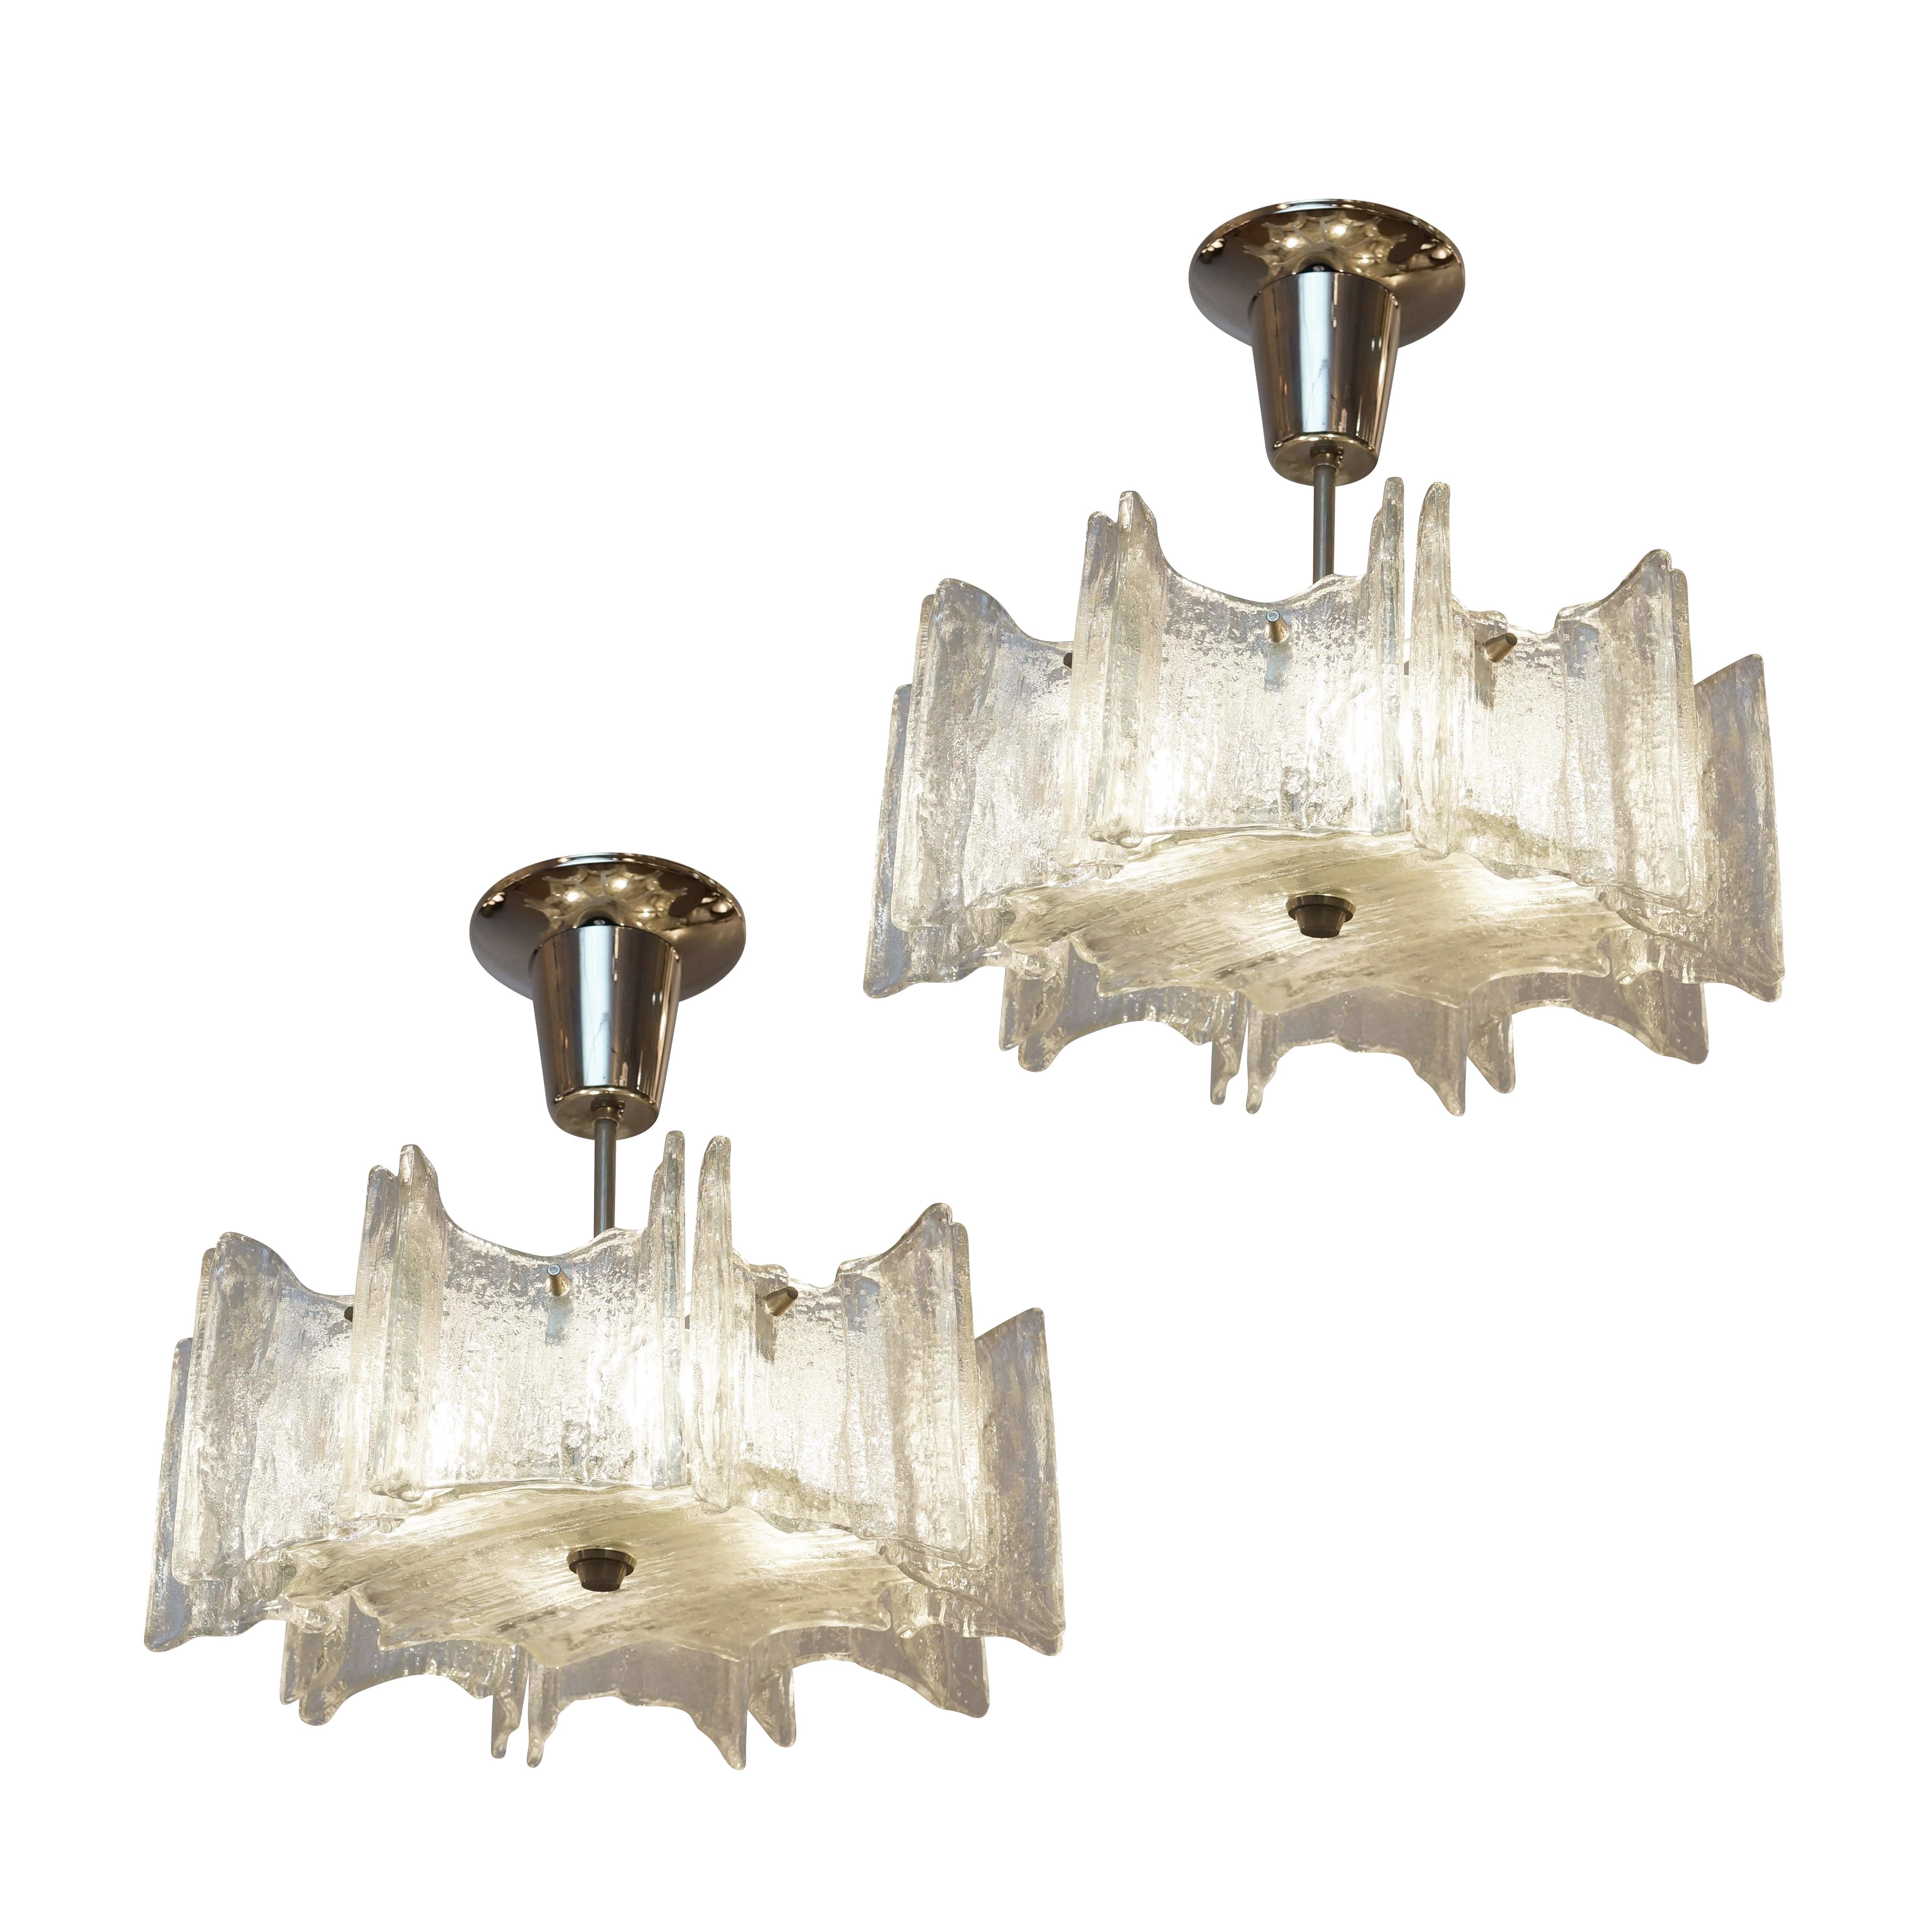 Pair of Mid-Century chandeliers by Kalmar made in the 1960’s using textured Murano glass. Polished nickel hardware holding 4 candelabra sockets. Sold individually-price per fixture.

Condition: Excellent vintage condition, minor wear consistent with